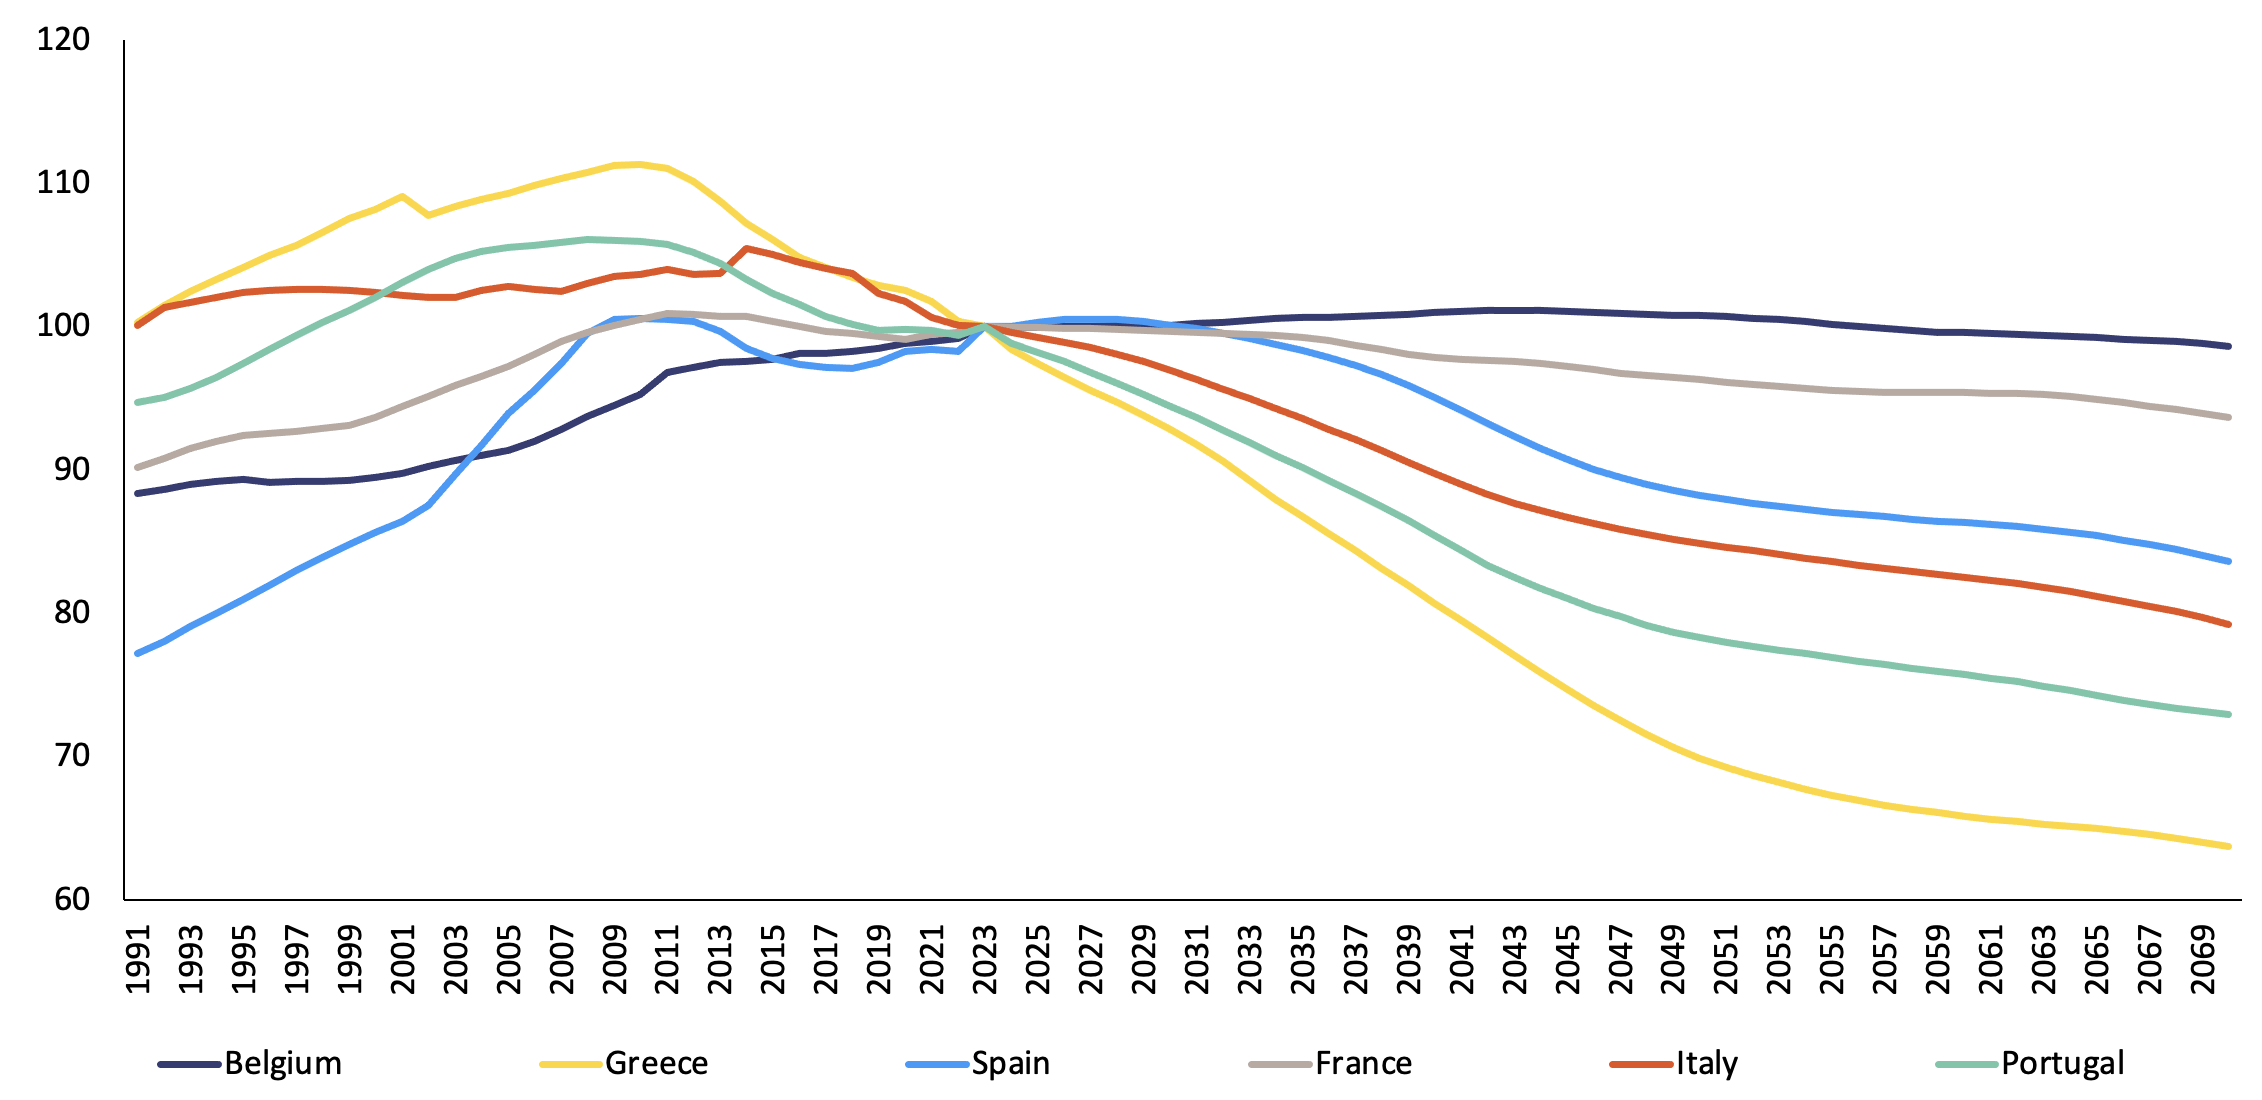 Figure 1 Working-age population projections in selected EU countries